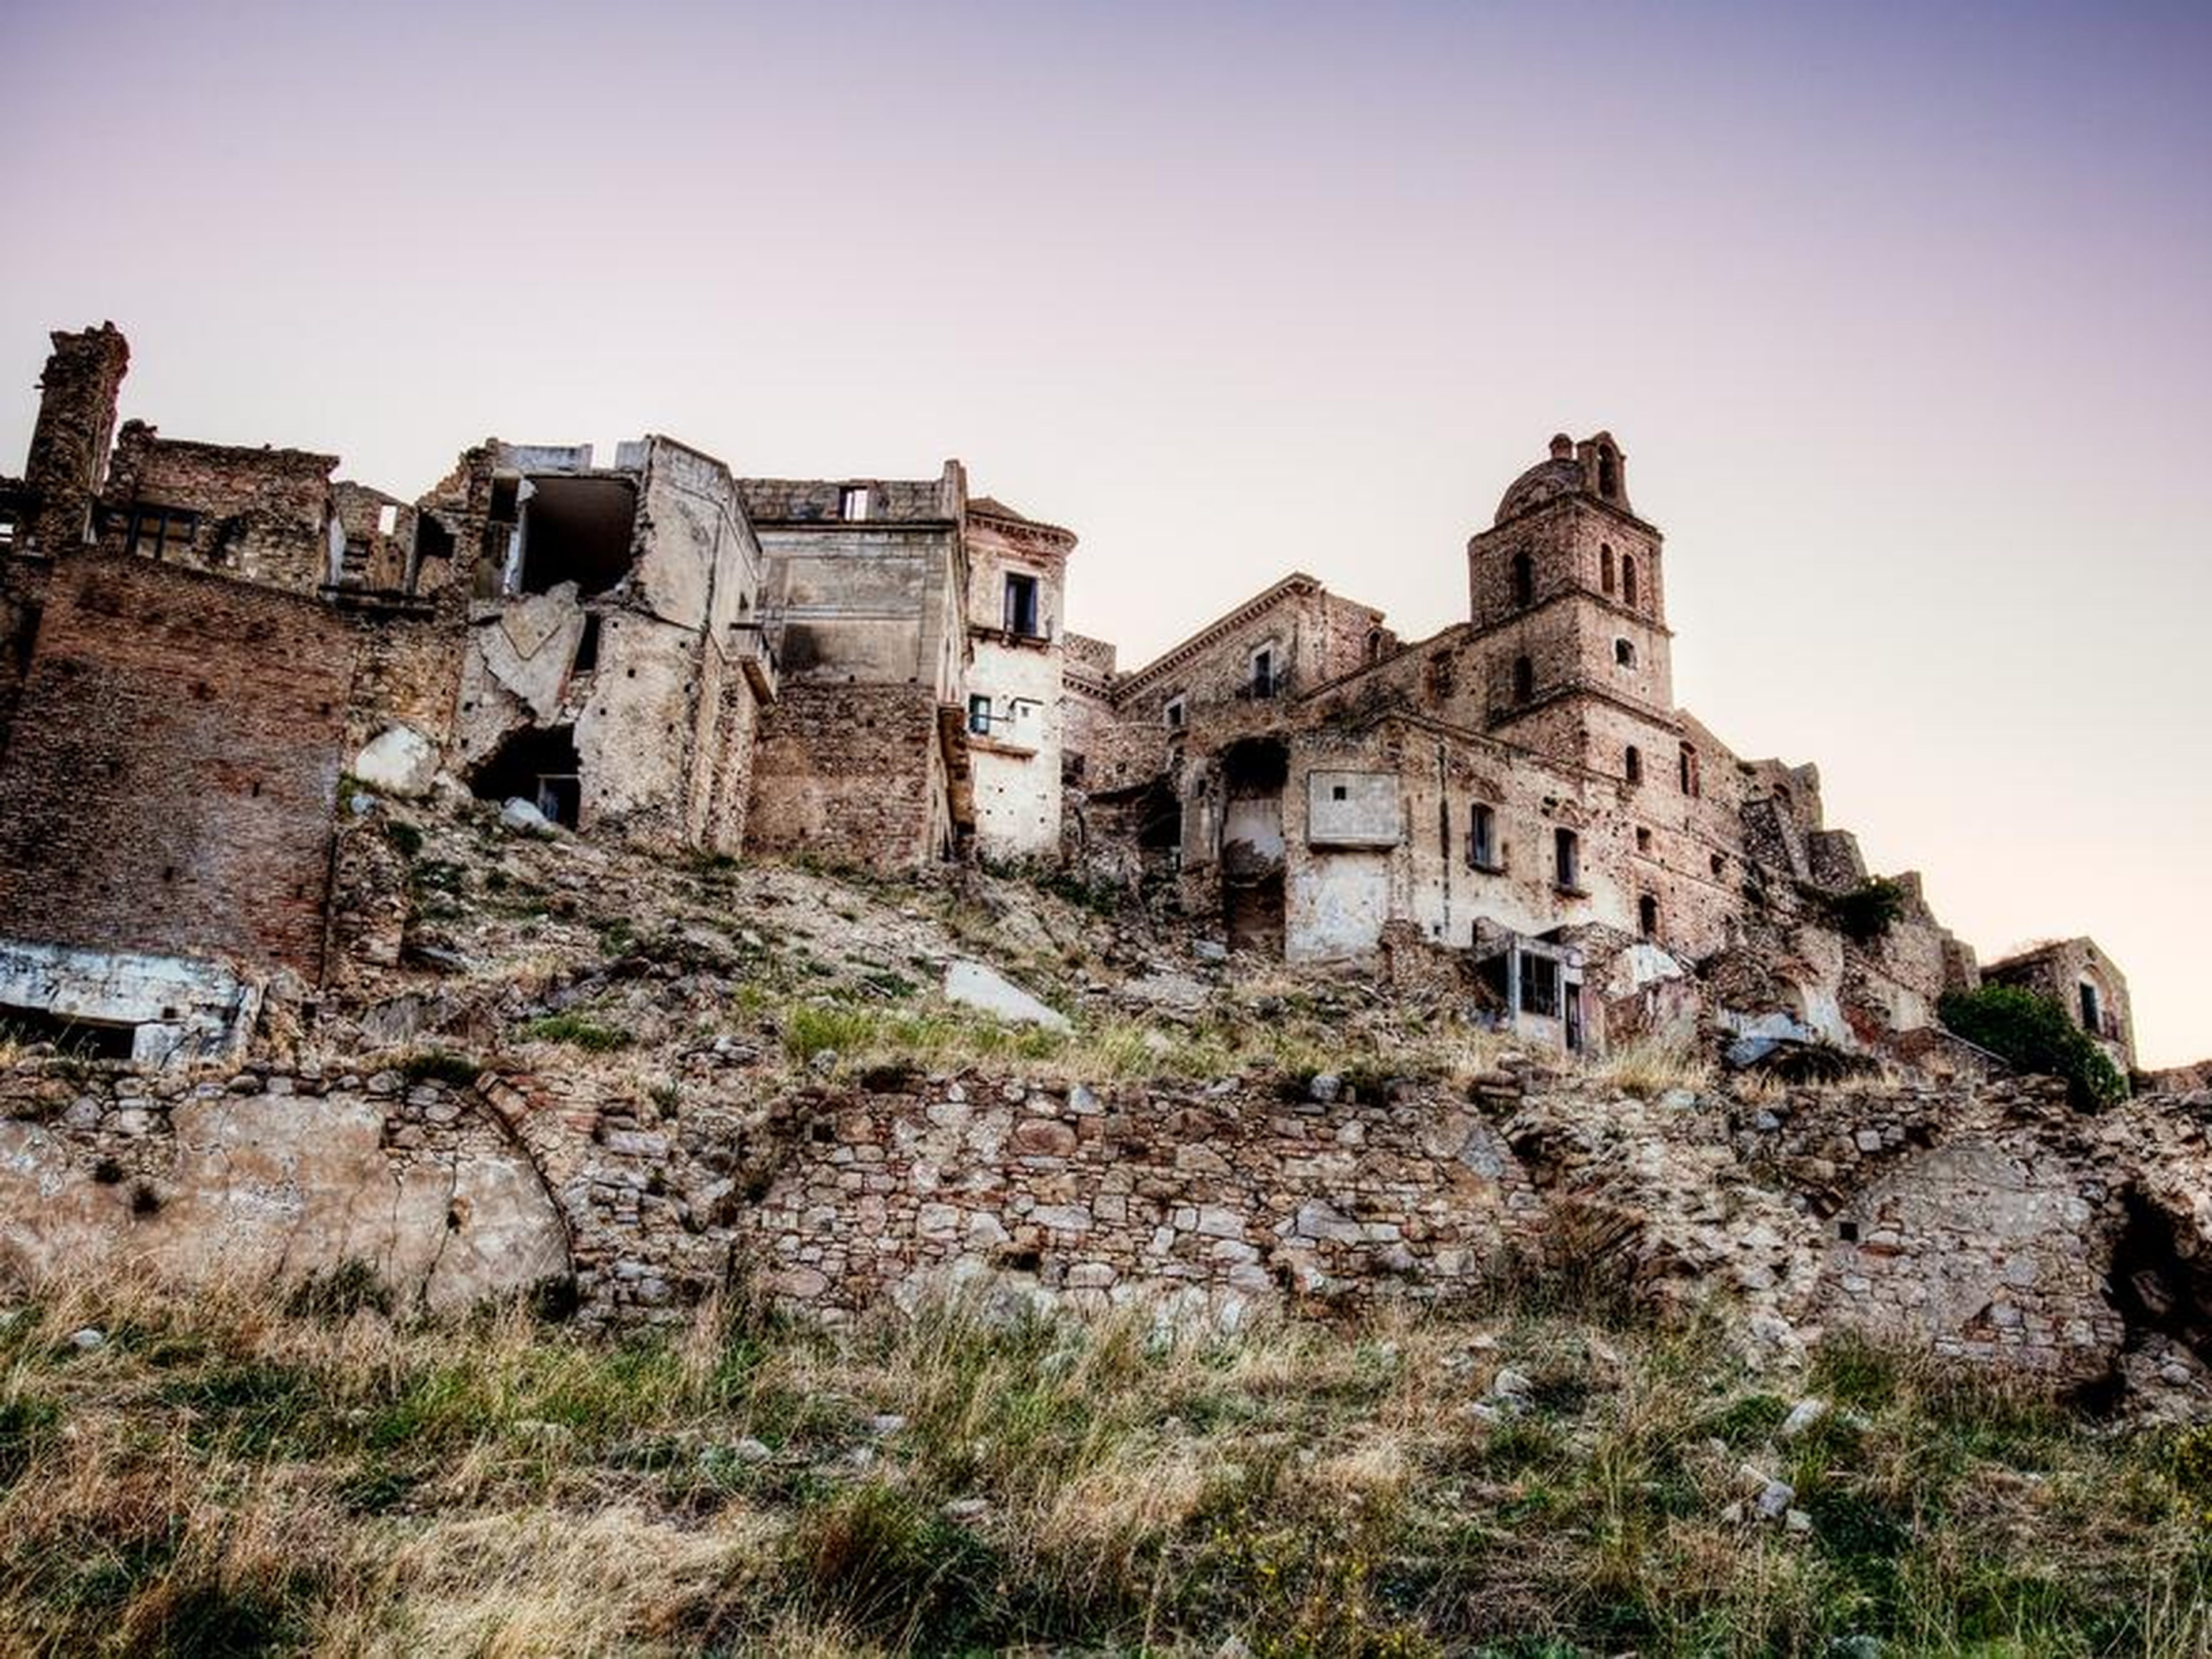 Craco survived earthquakes and landslides before being abandoned in 1991.